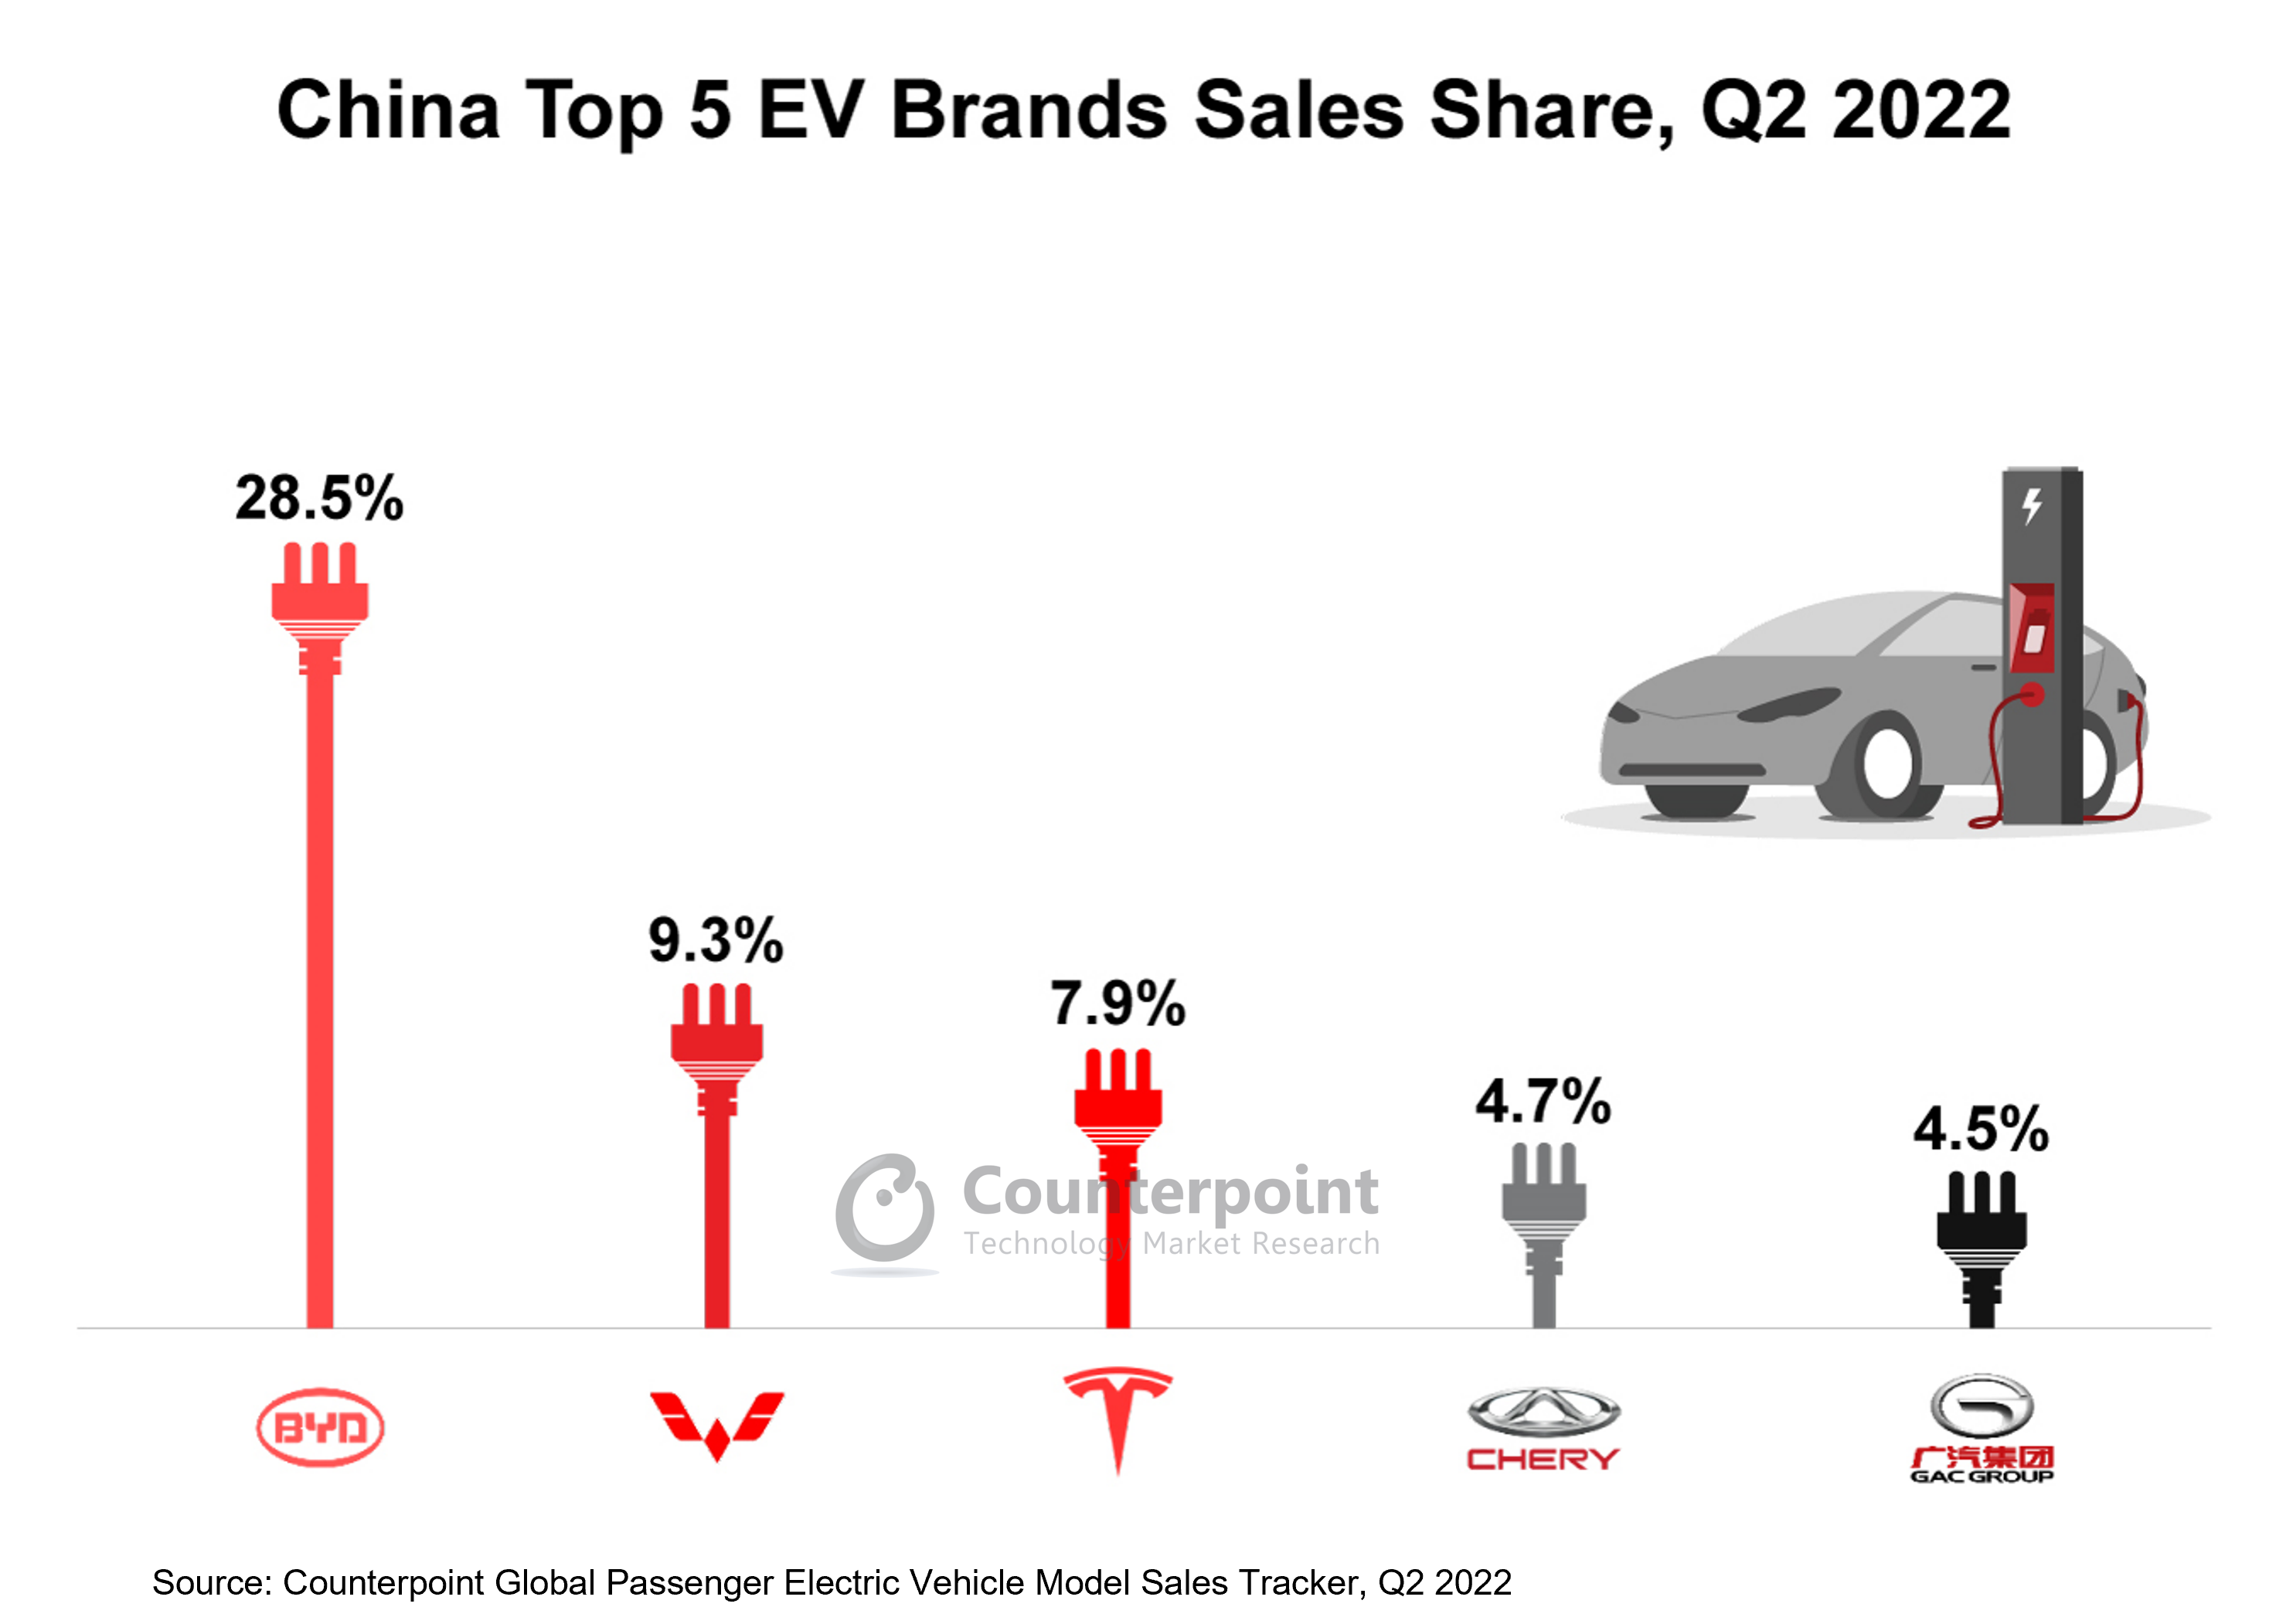 China EV market in Q2 2022 Counterpoint